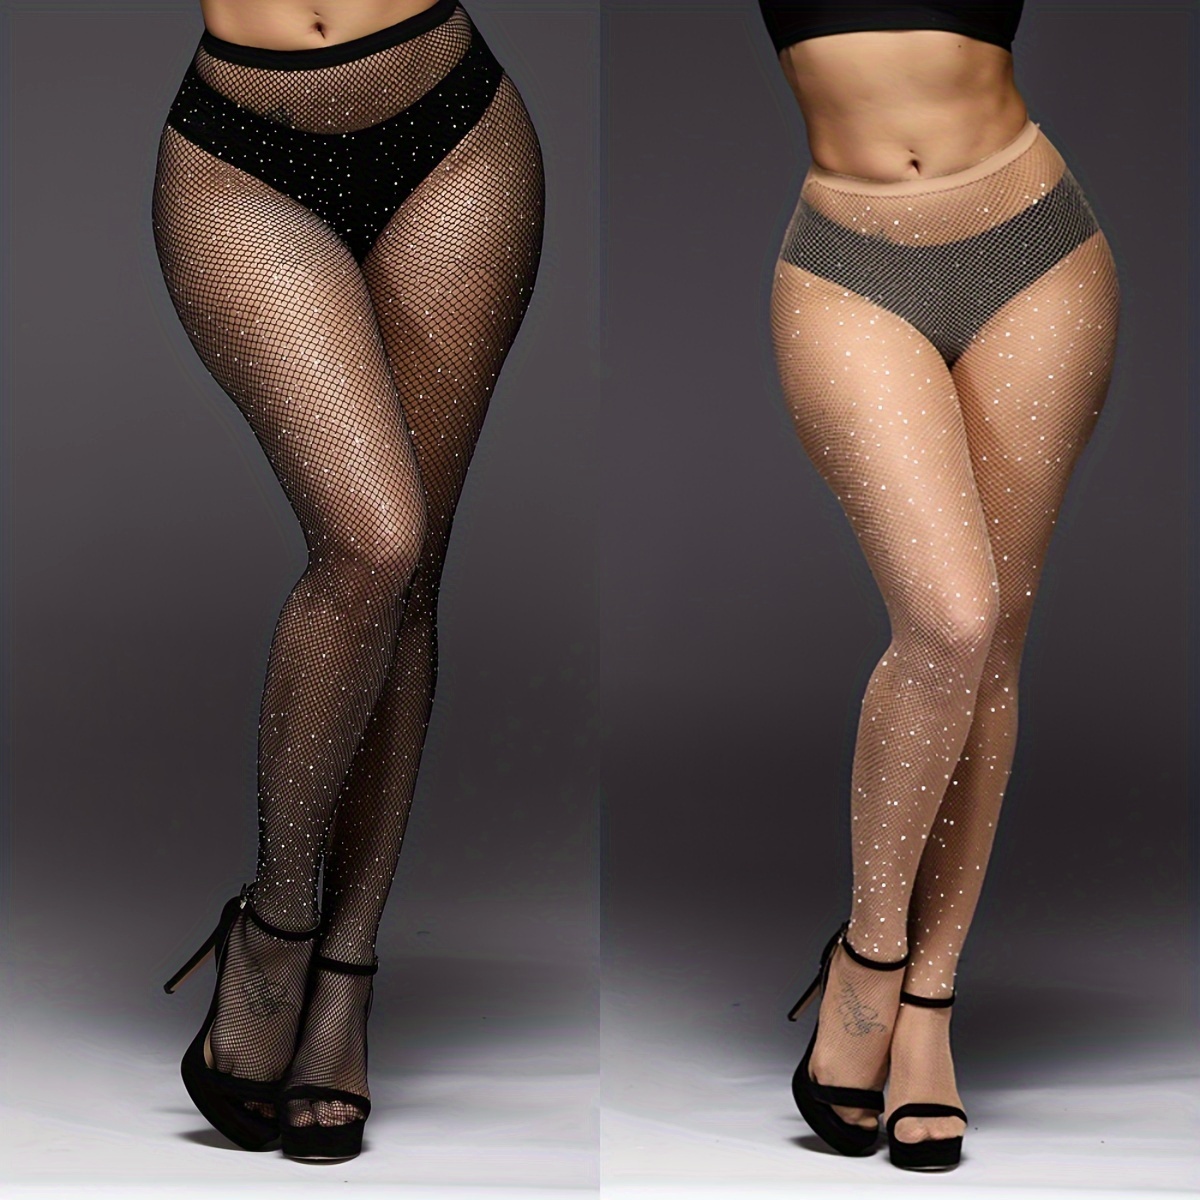 2 Piece Rhinestone Fishnet Tights, Sexy Hollow Out High Waist Mesh  Pantyhose, Women's Stockings & Hosiery